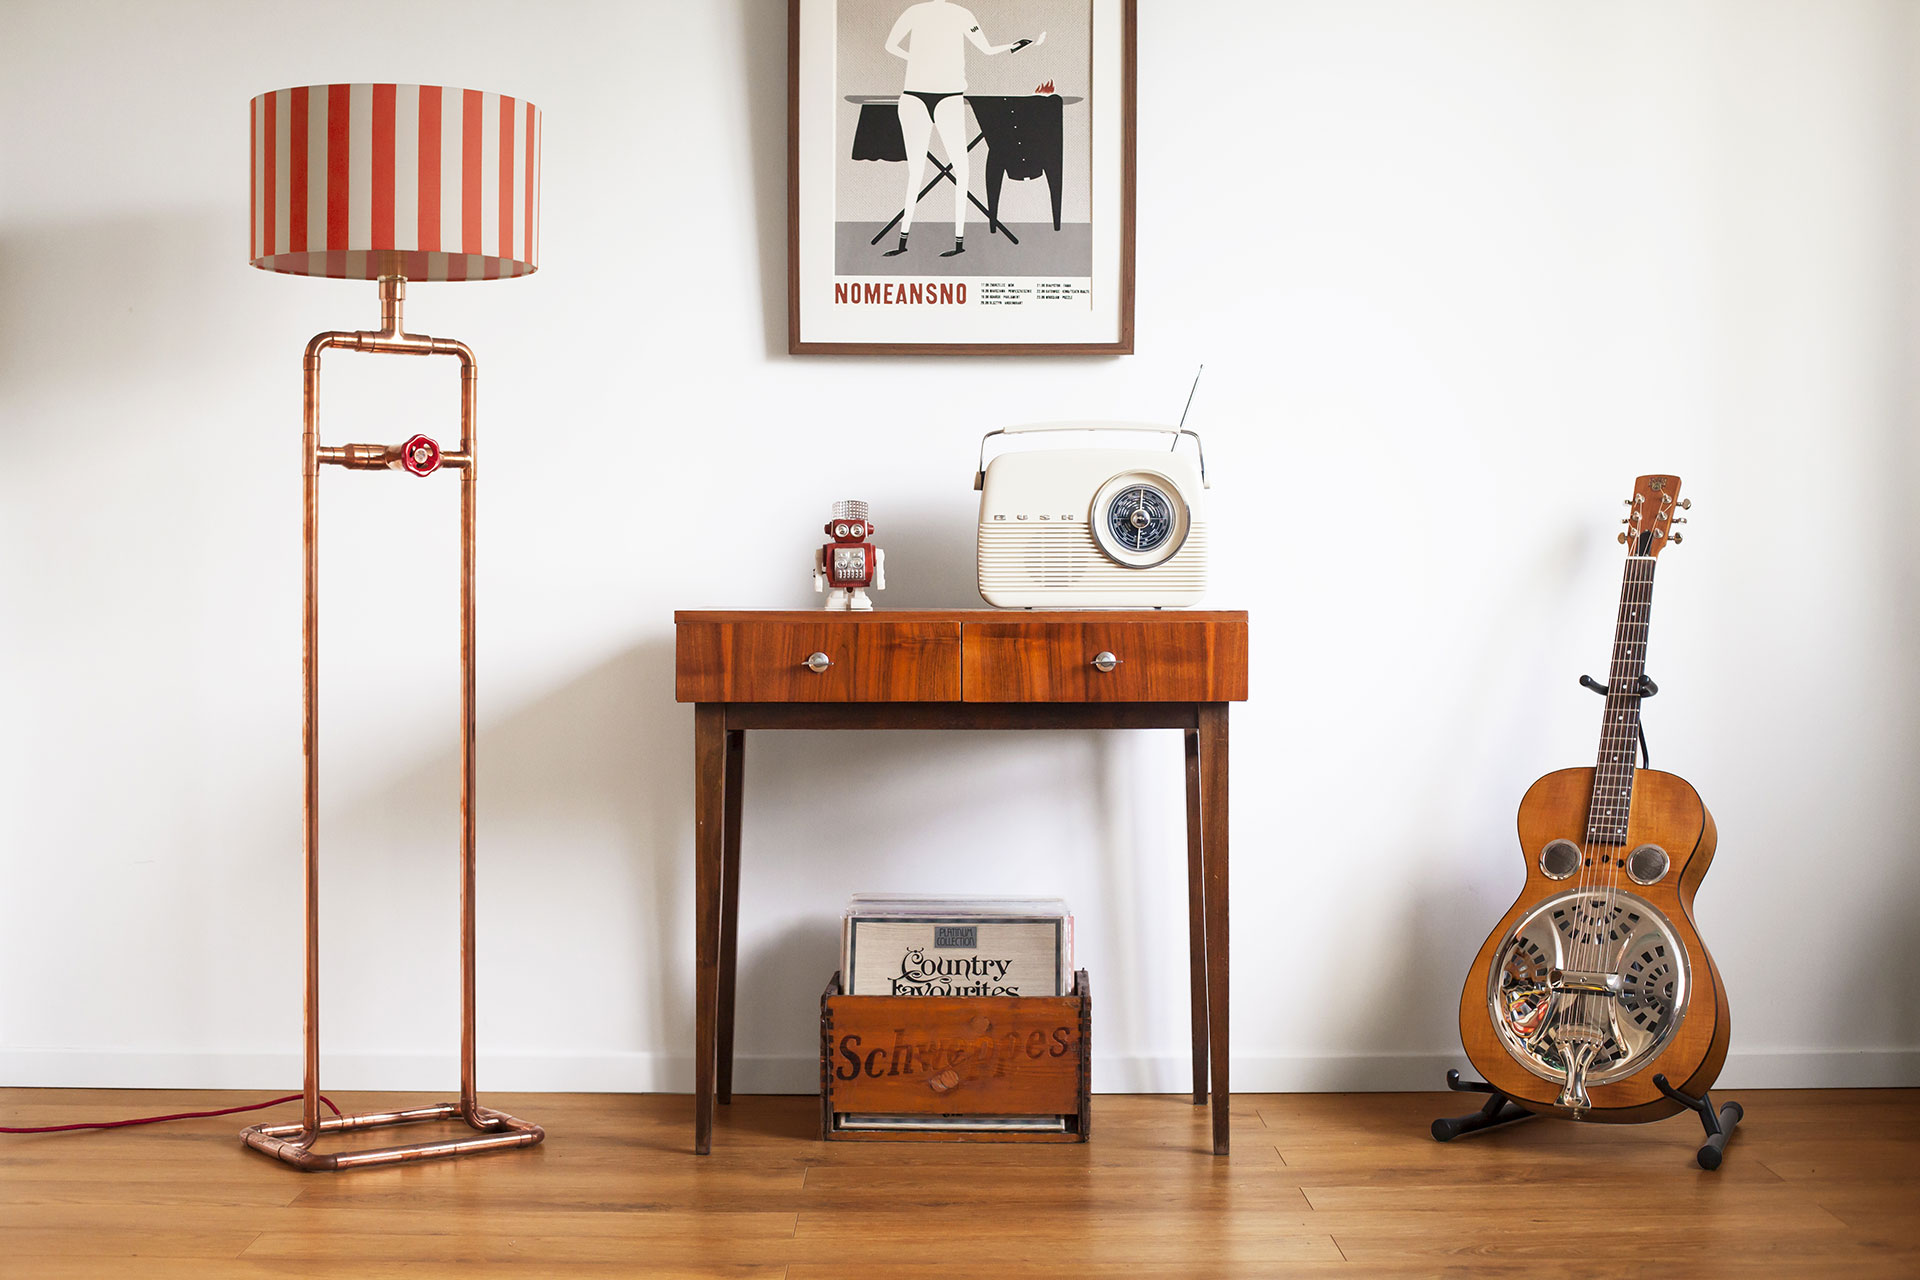 Industrial style copper tubing floor lamp with knob dimmer and stripe shade in cozy hip apartment